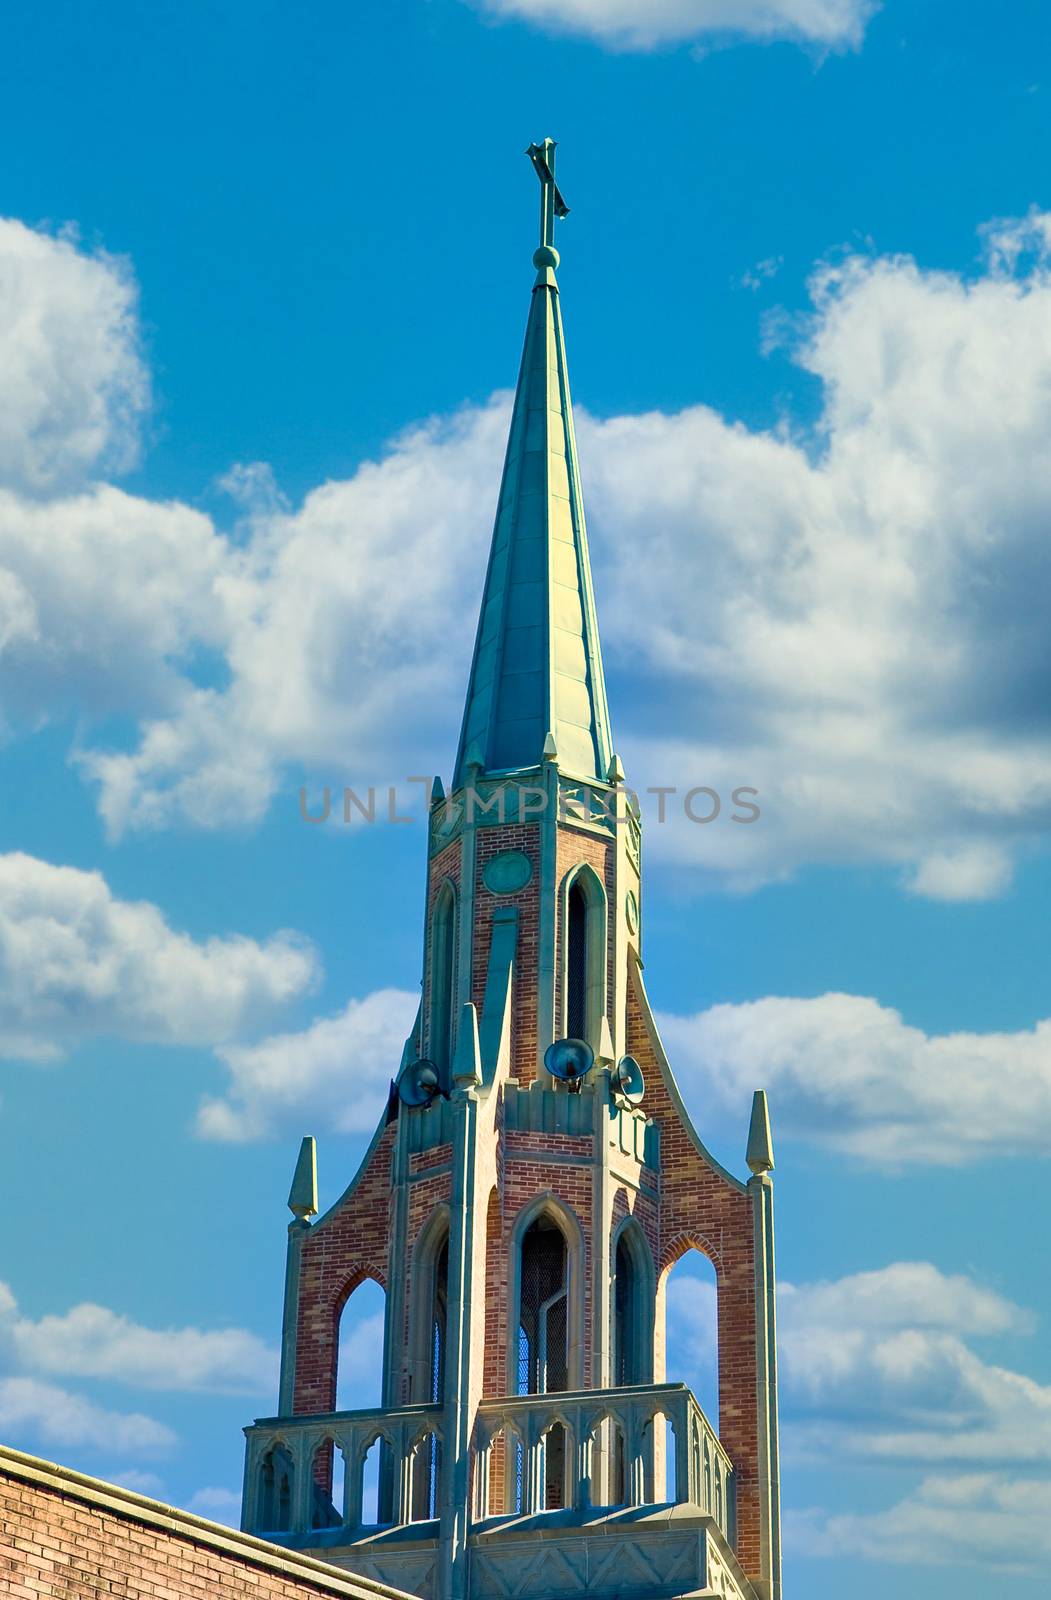 An old church steeple with bell tower against a blue sky